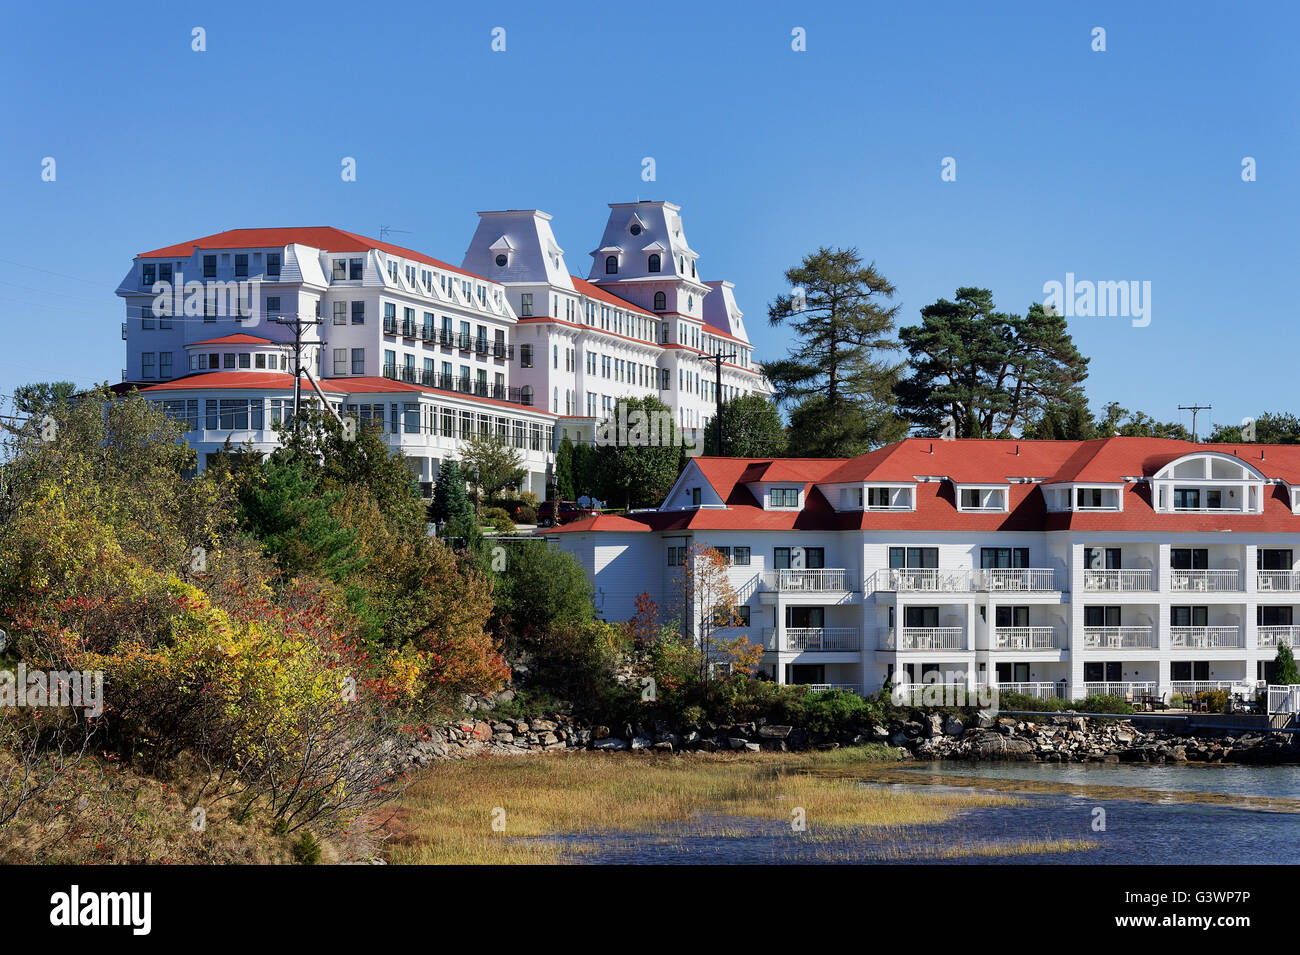 The Wentworth by the Sea (formerly The Hotel Wentworth), historic grand hotel in New Castle, New Hampshire, USA Stock Photo